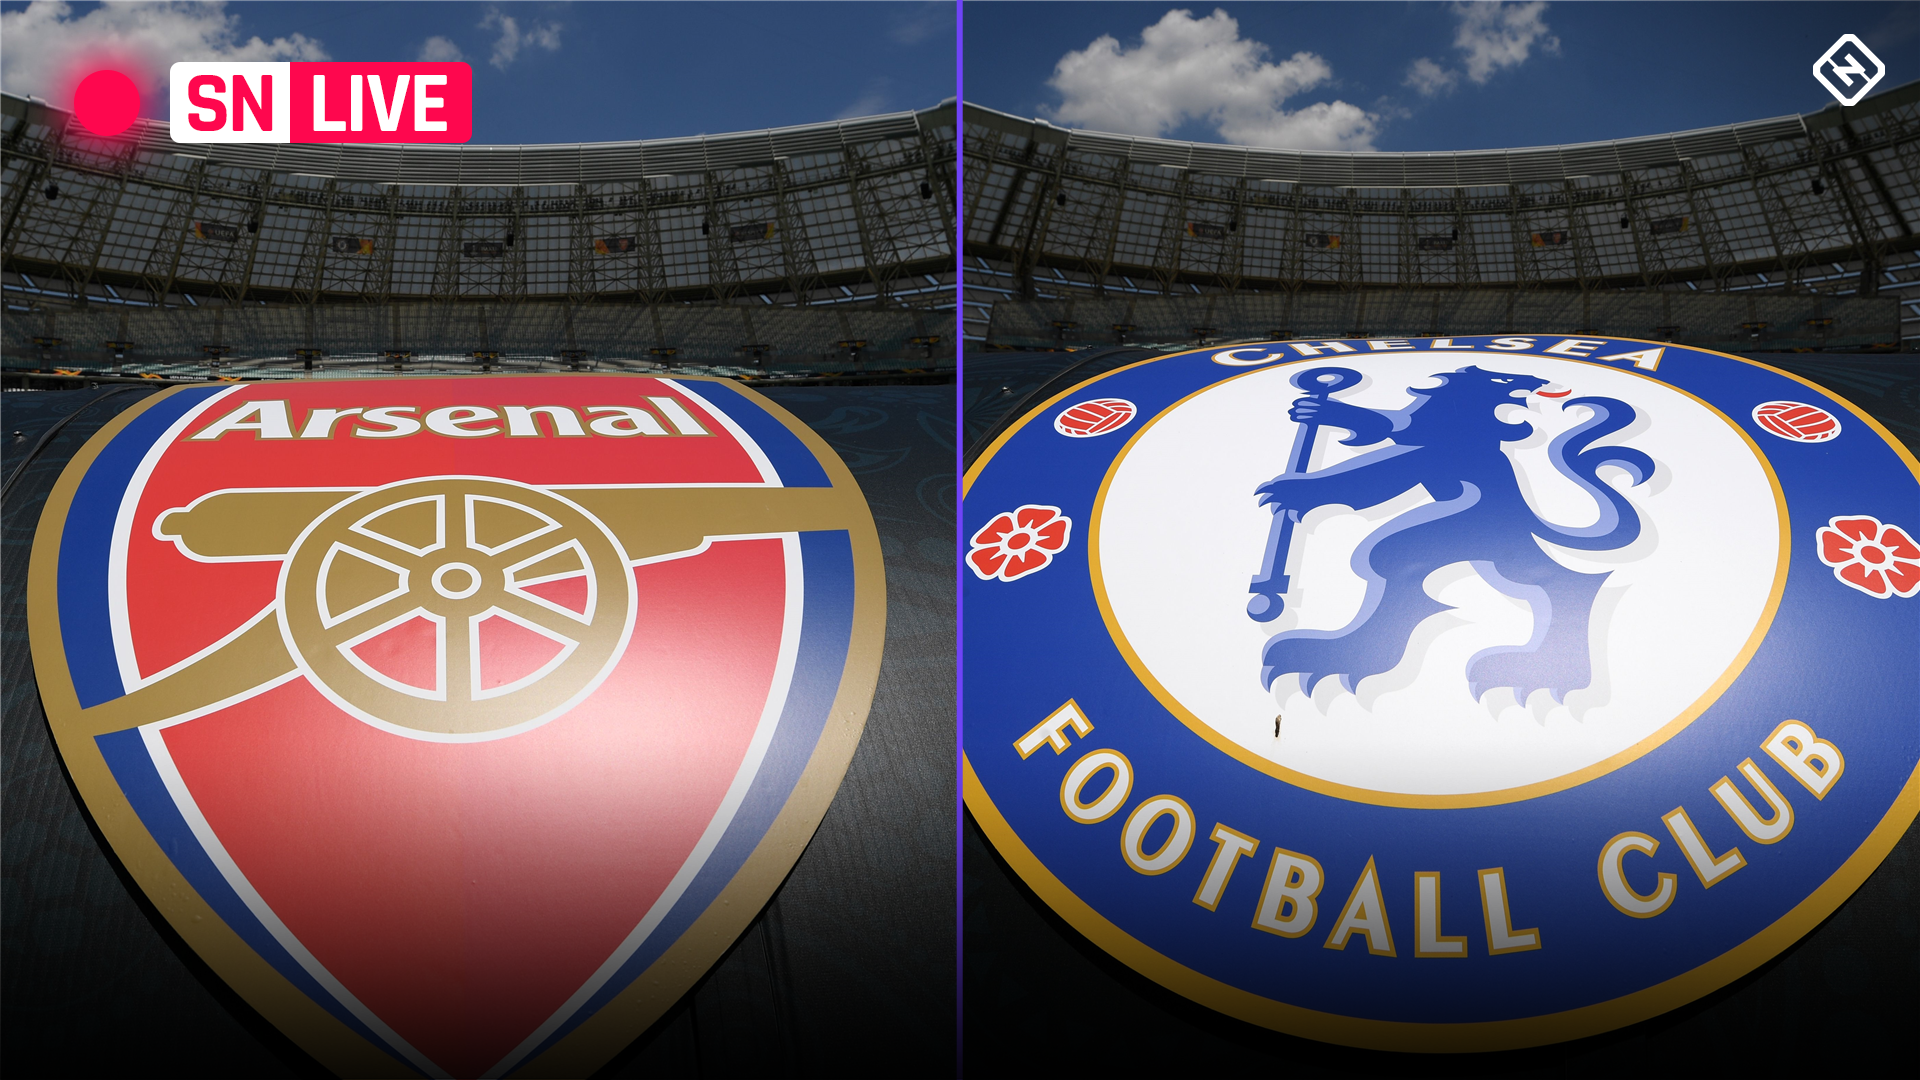 Arsenal vs. Chelsea: Live score, updates, highlights from 2019 Europa